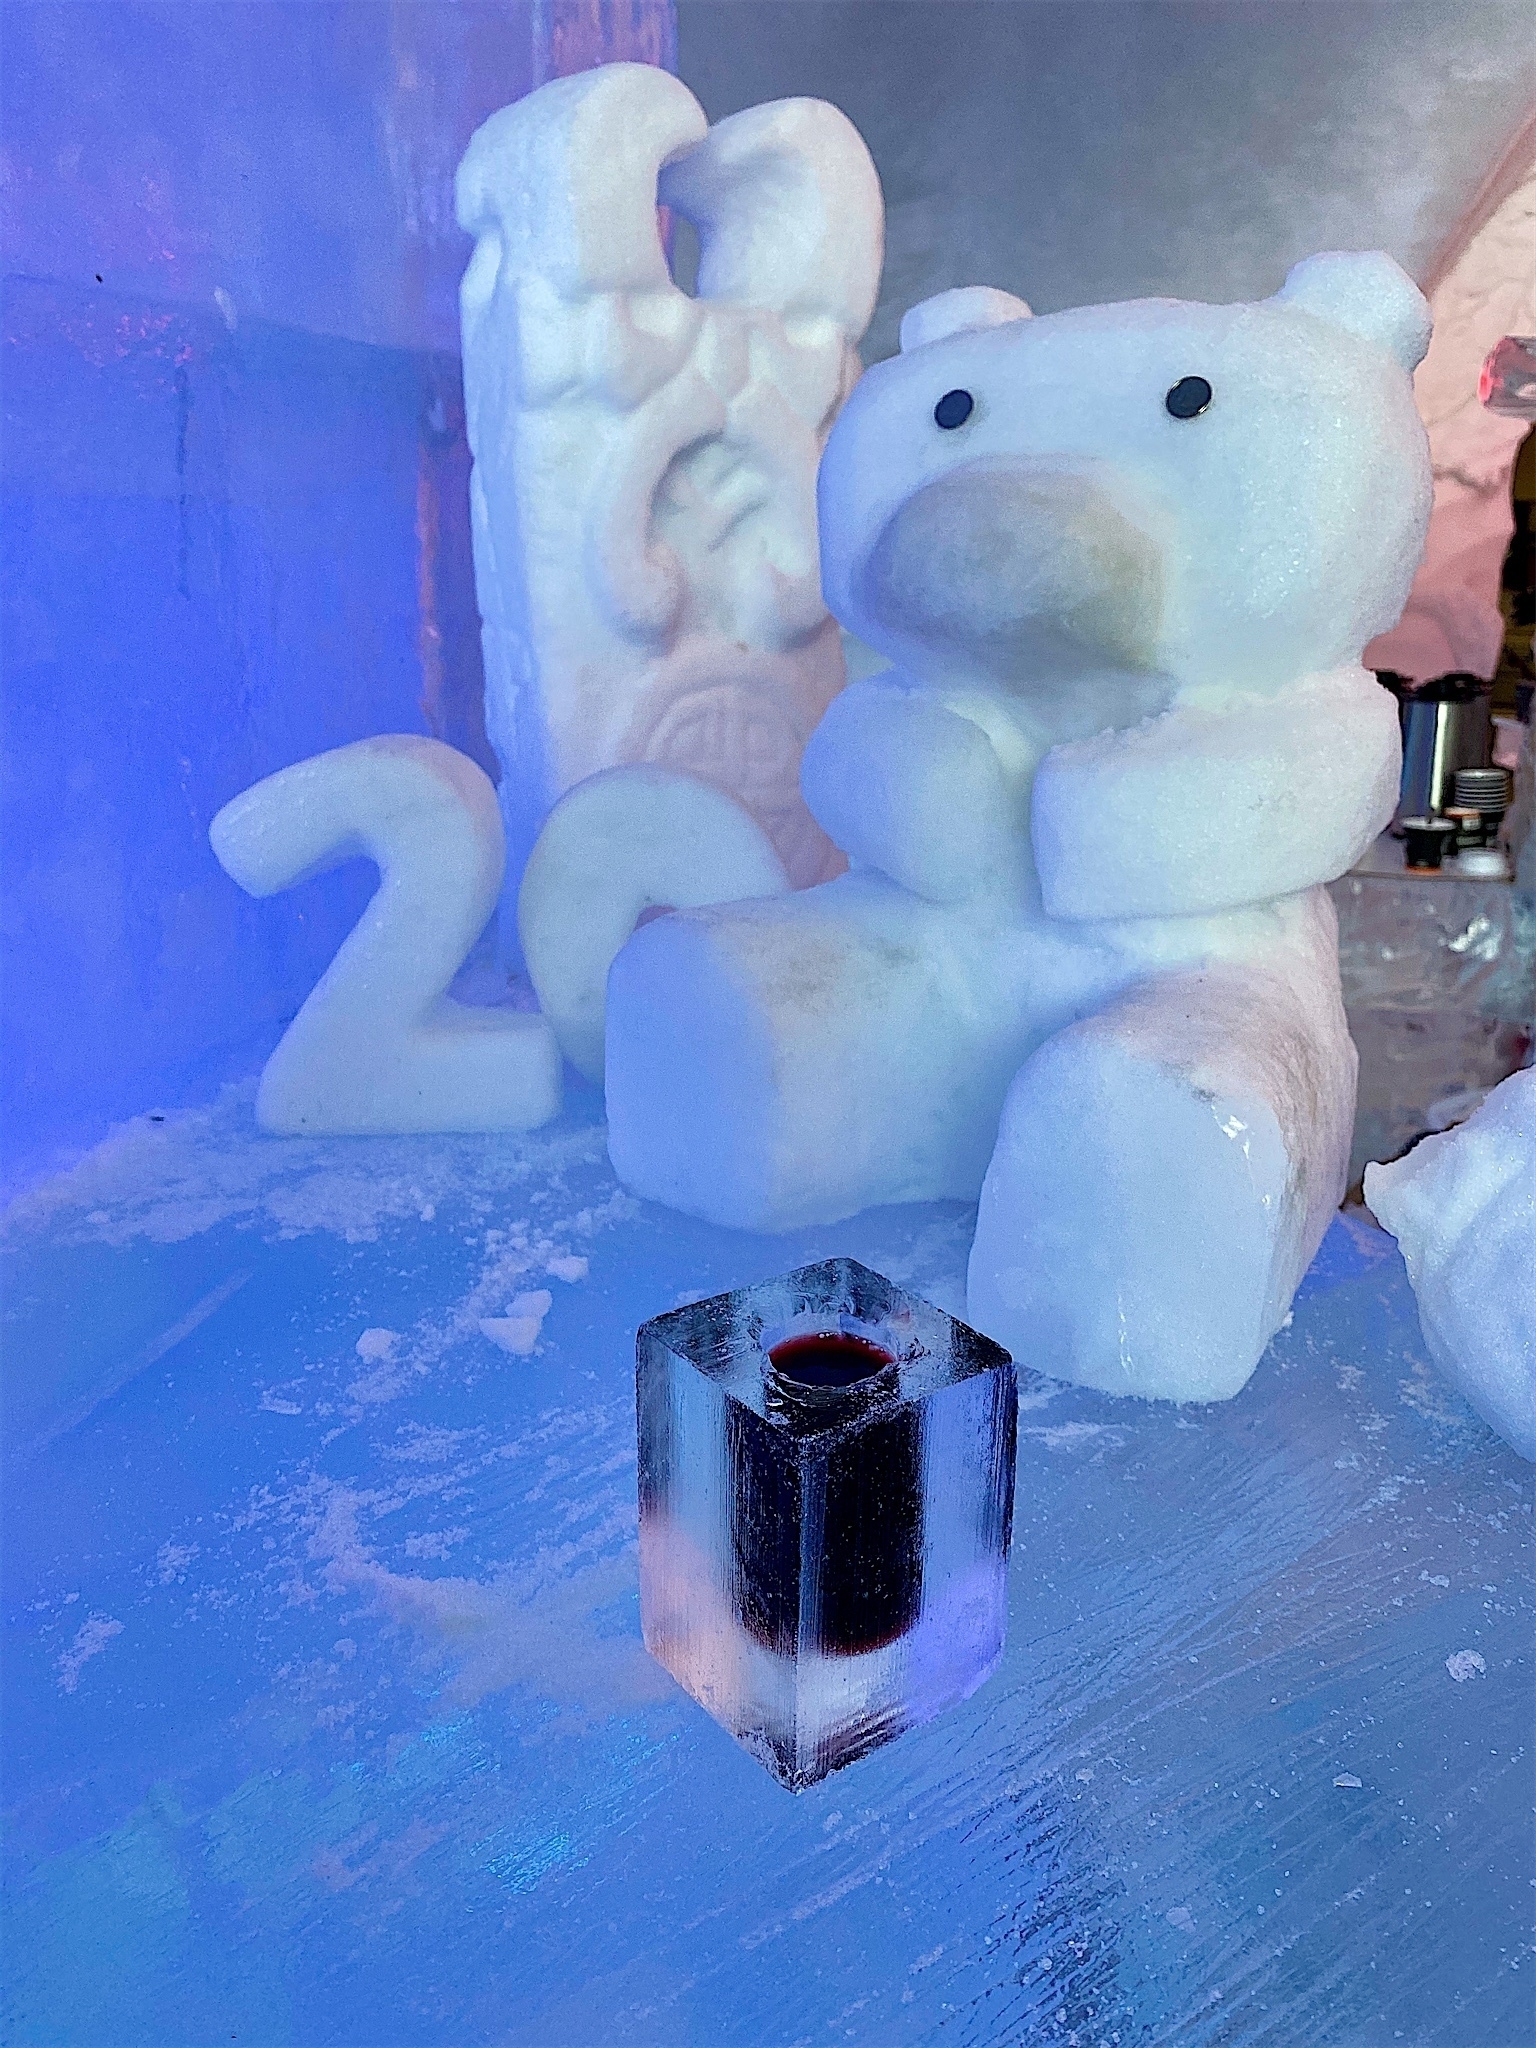 Rectangular shot-glass made out of ice, with red liquid inside, in front of a teddybear-like ice sculpture on a bar made of ice, sitting next to another ice sculpture (a random carving) and the '2' and '0' also made out of ice.